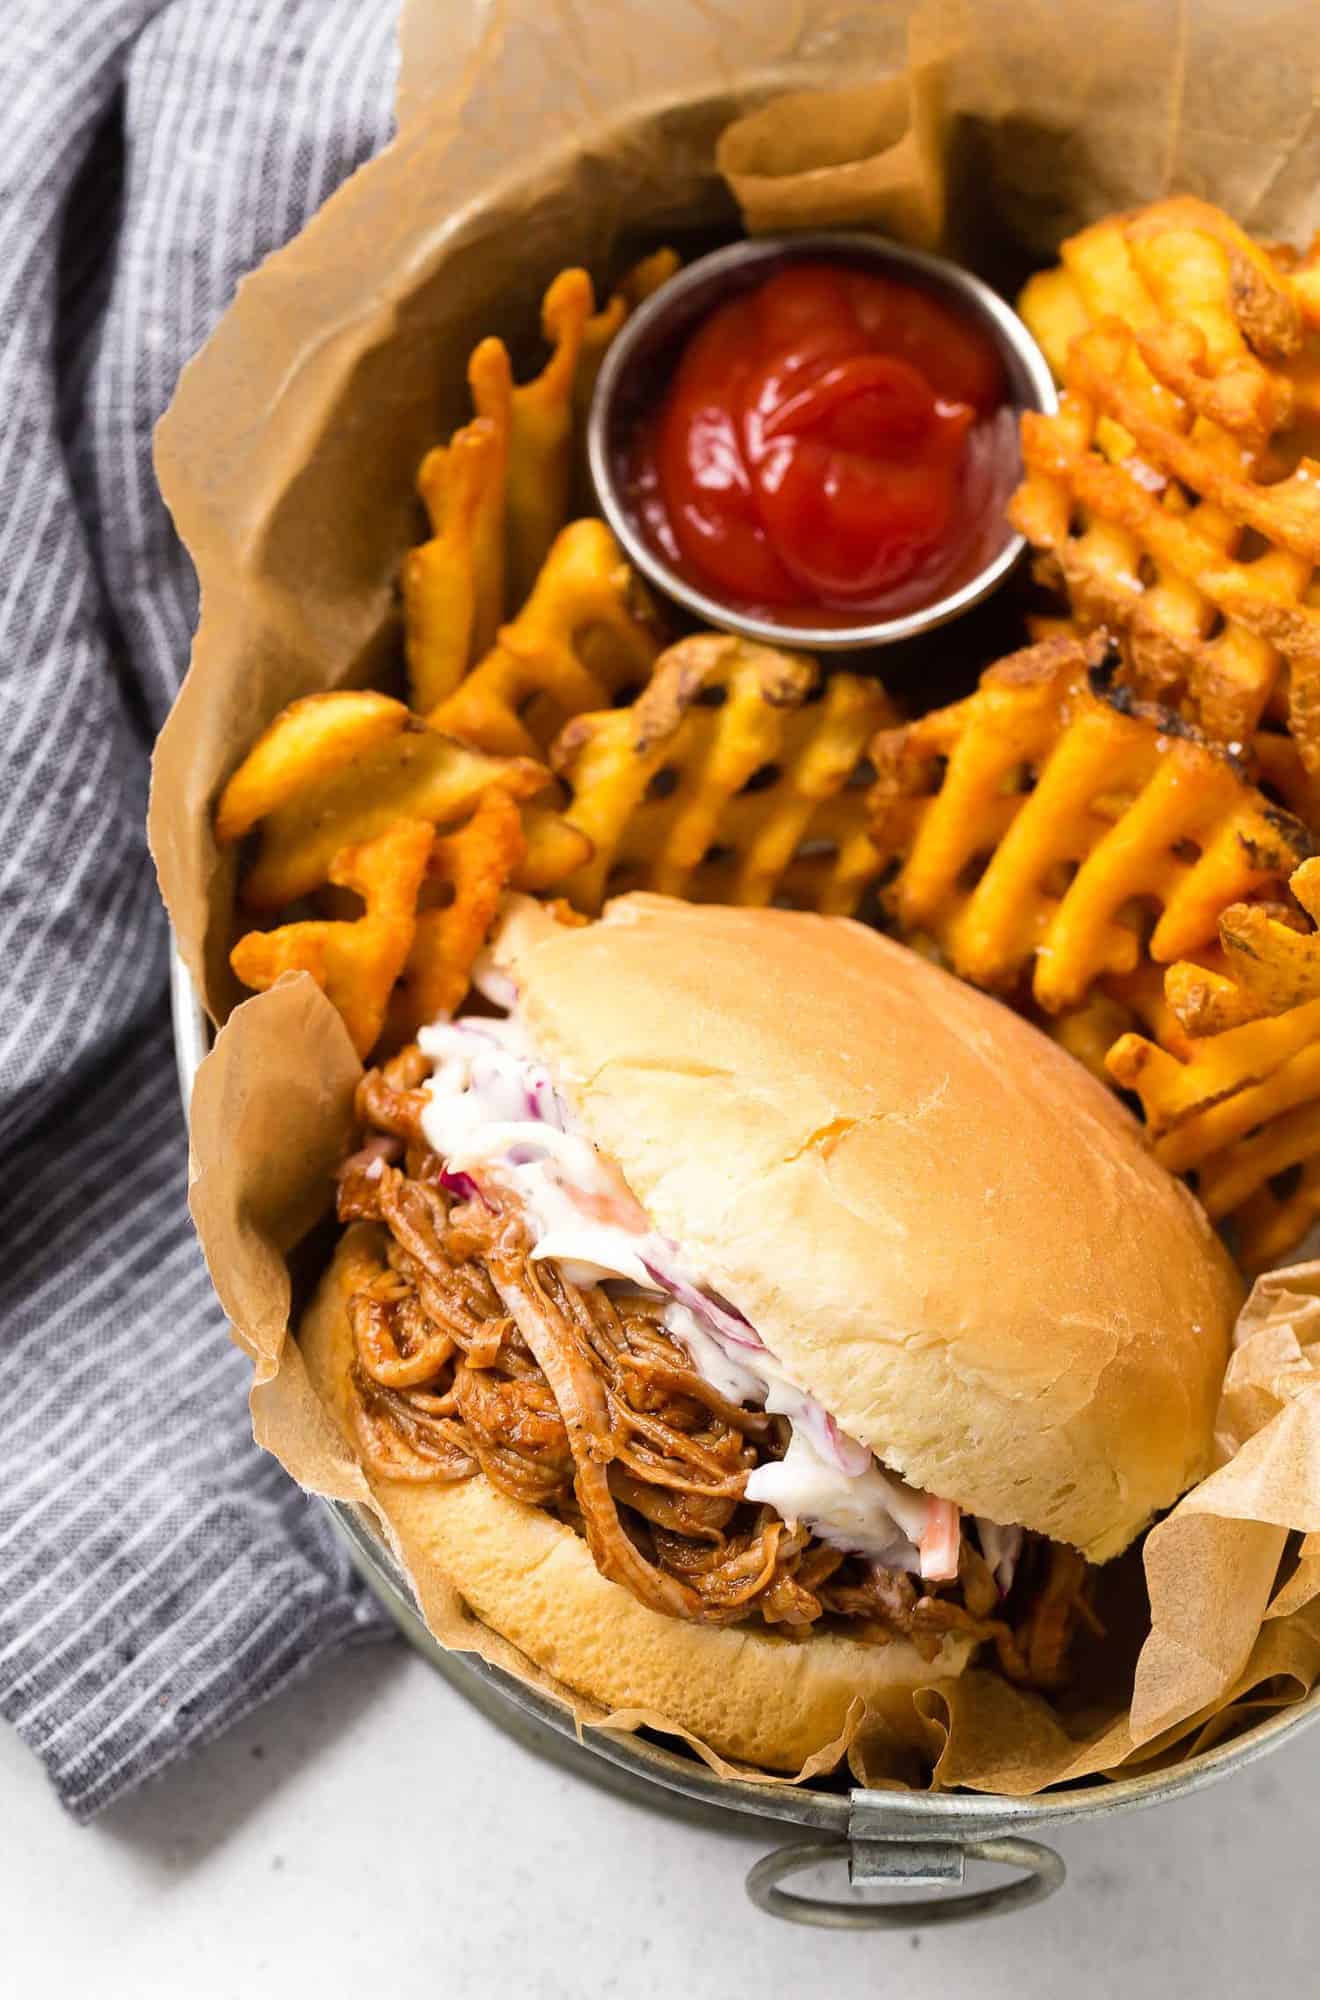 Pulled pork sandwich in a basket with waffle fries.